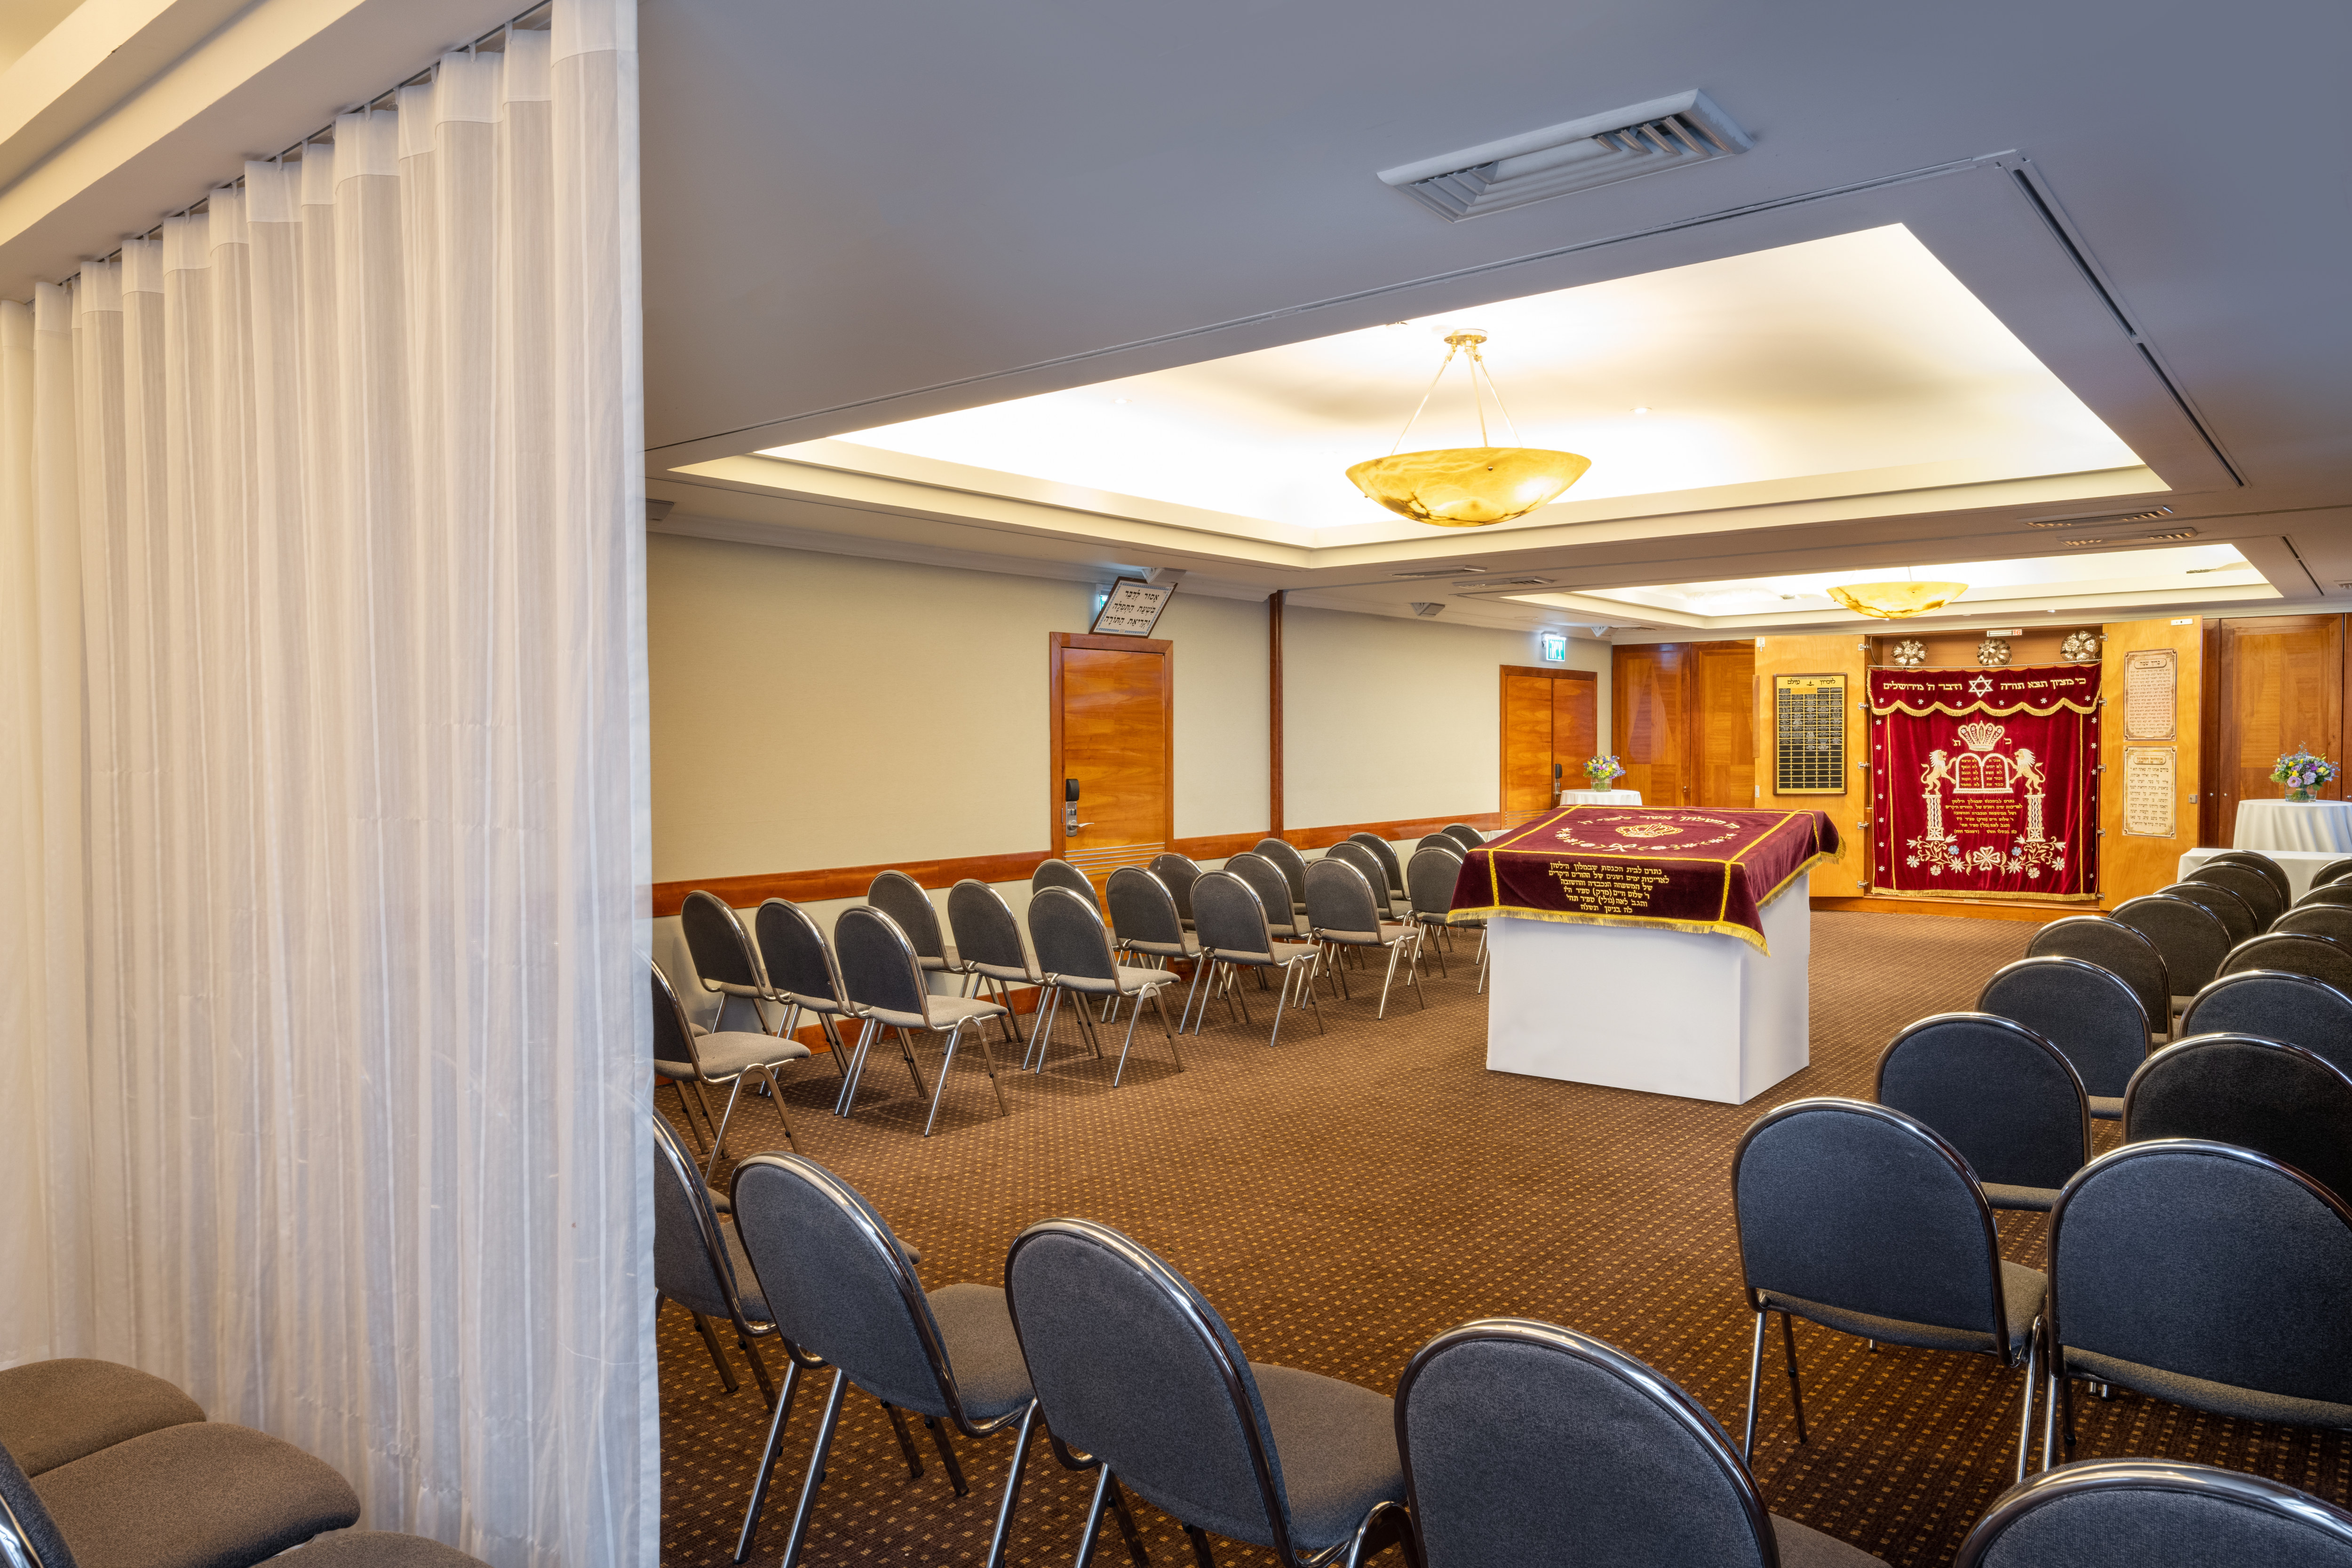 Meeting Room With Synagogue Set Up